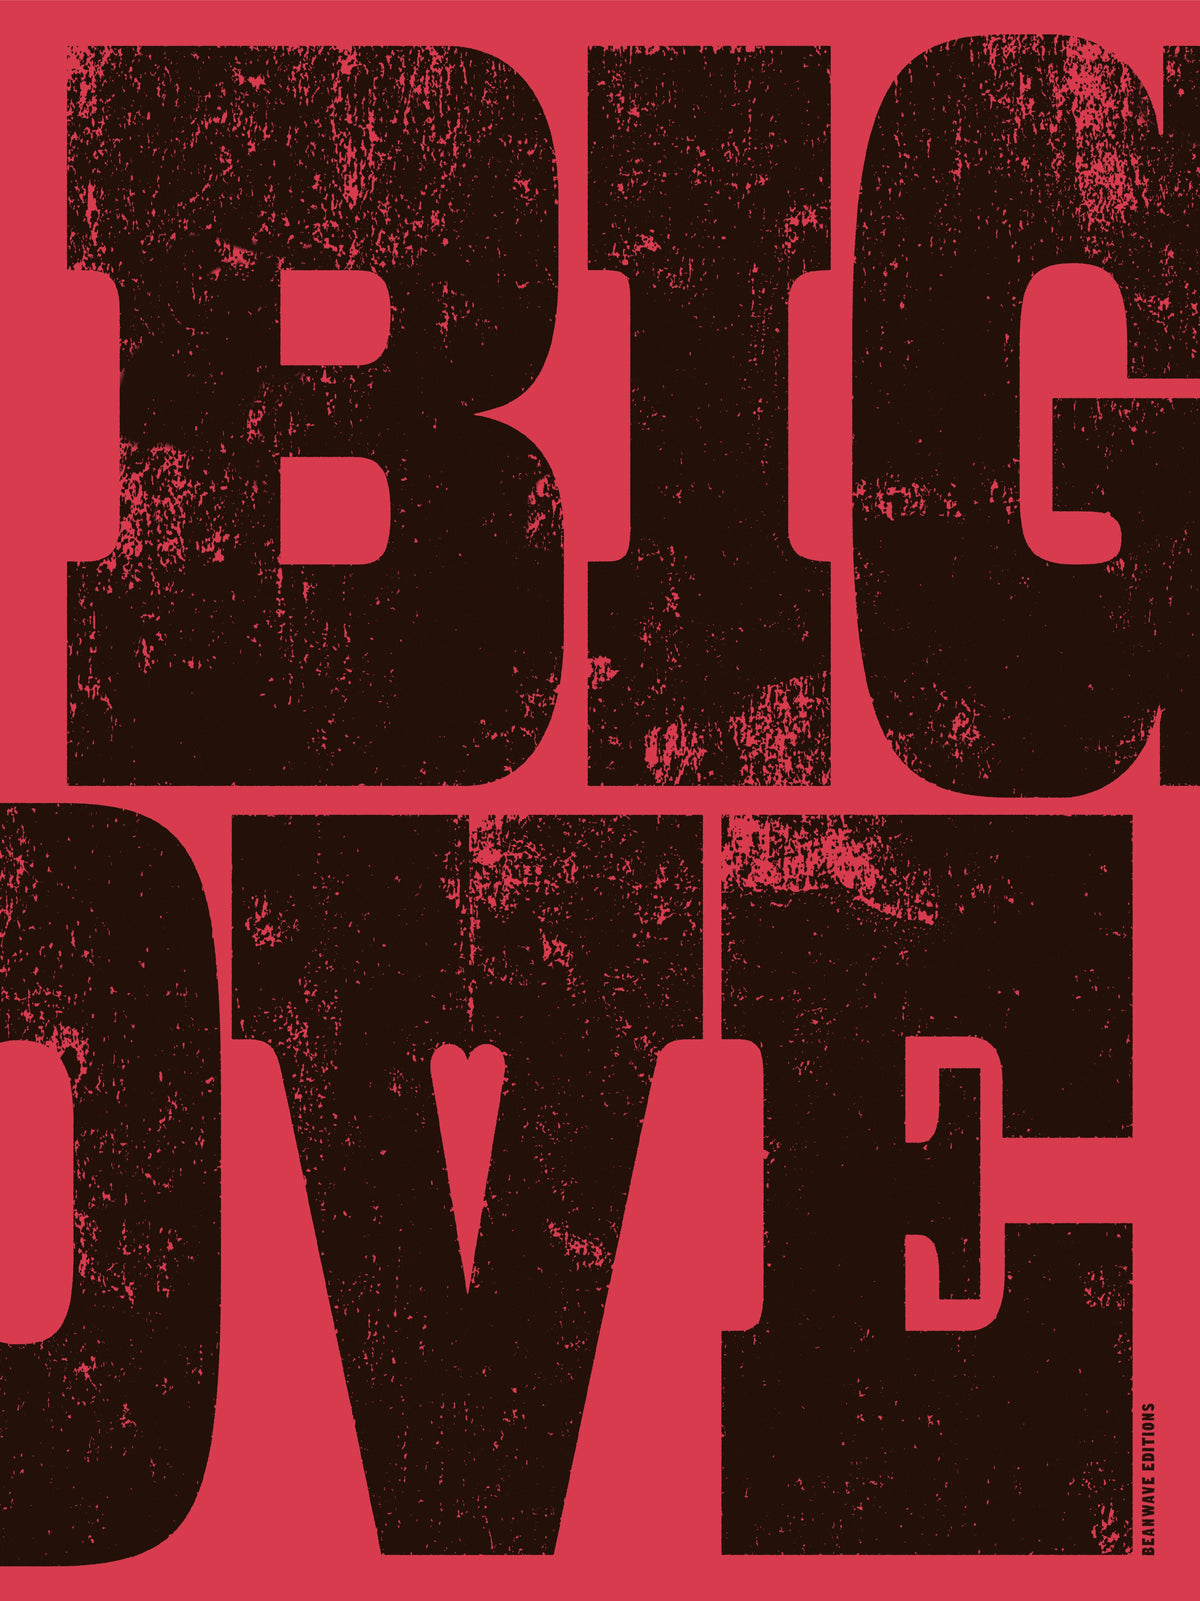 Big Love-Hot Pink(Custom Hooked Framing) by Beanwave Editions